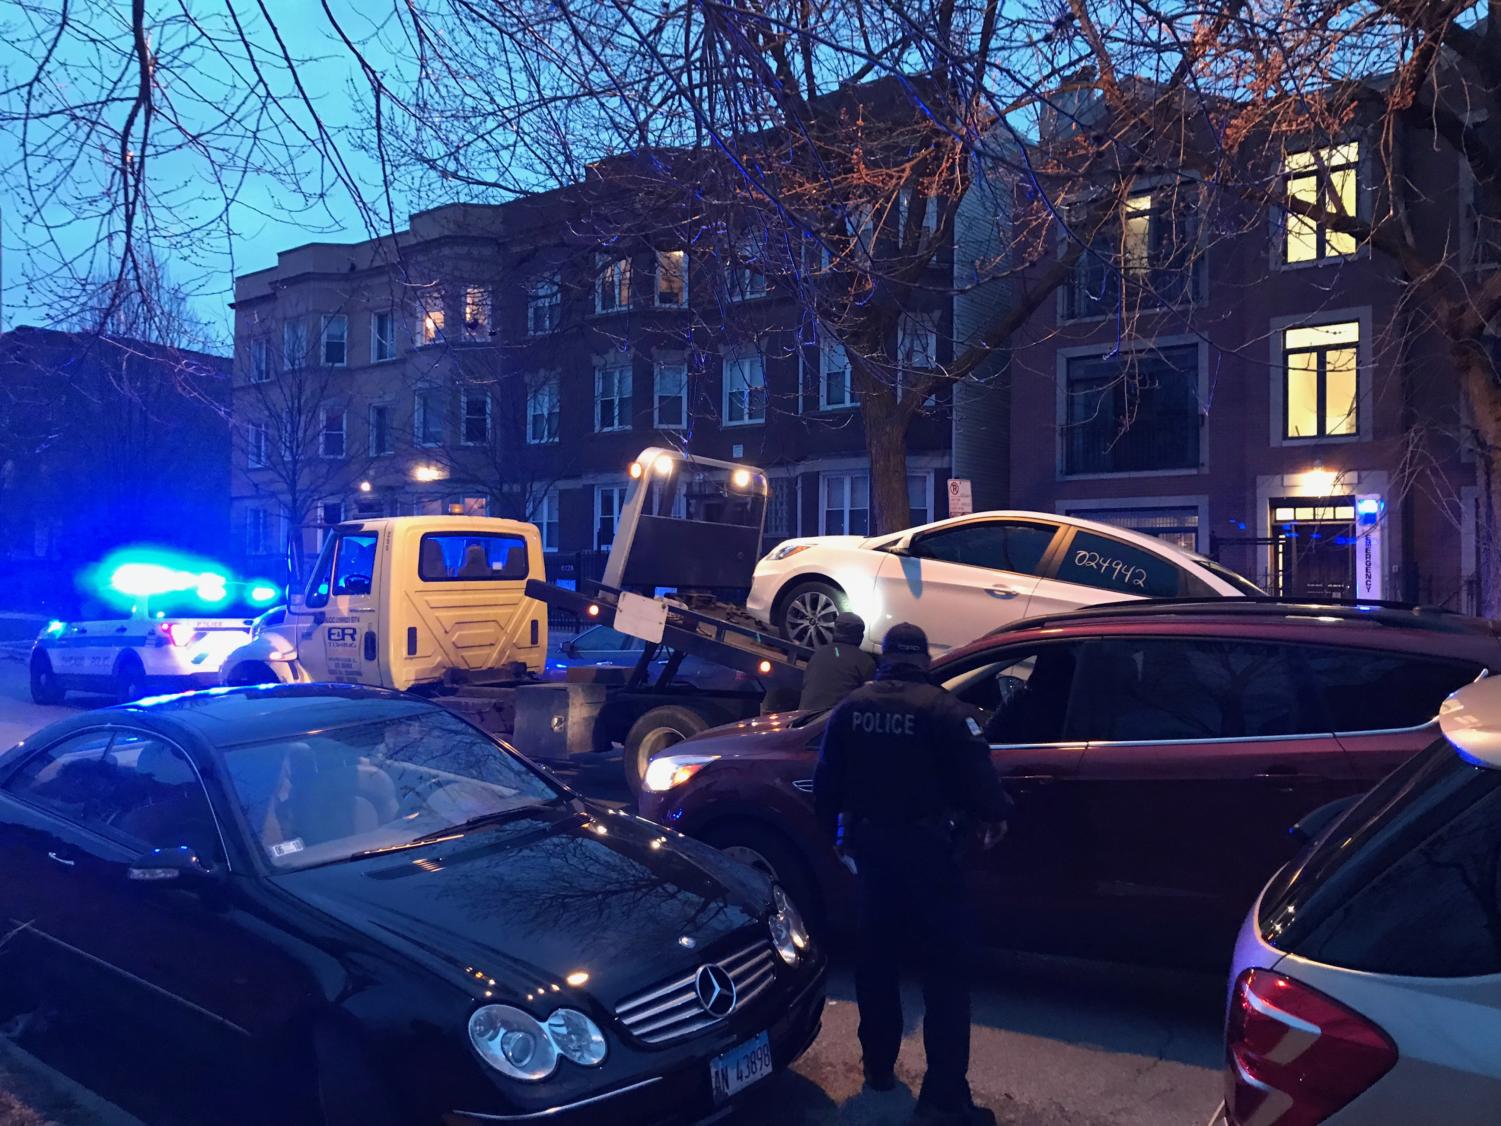 CPD tow a white Hyundai from the scene of Tuesday's shooting. One witness said that after being shot, the victim took something from the car, before self-transporting to the hospital.